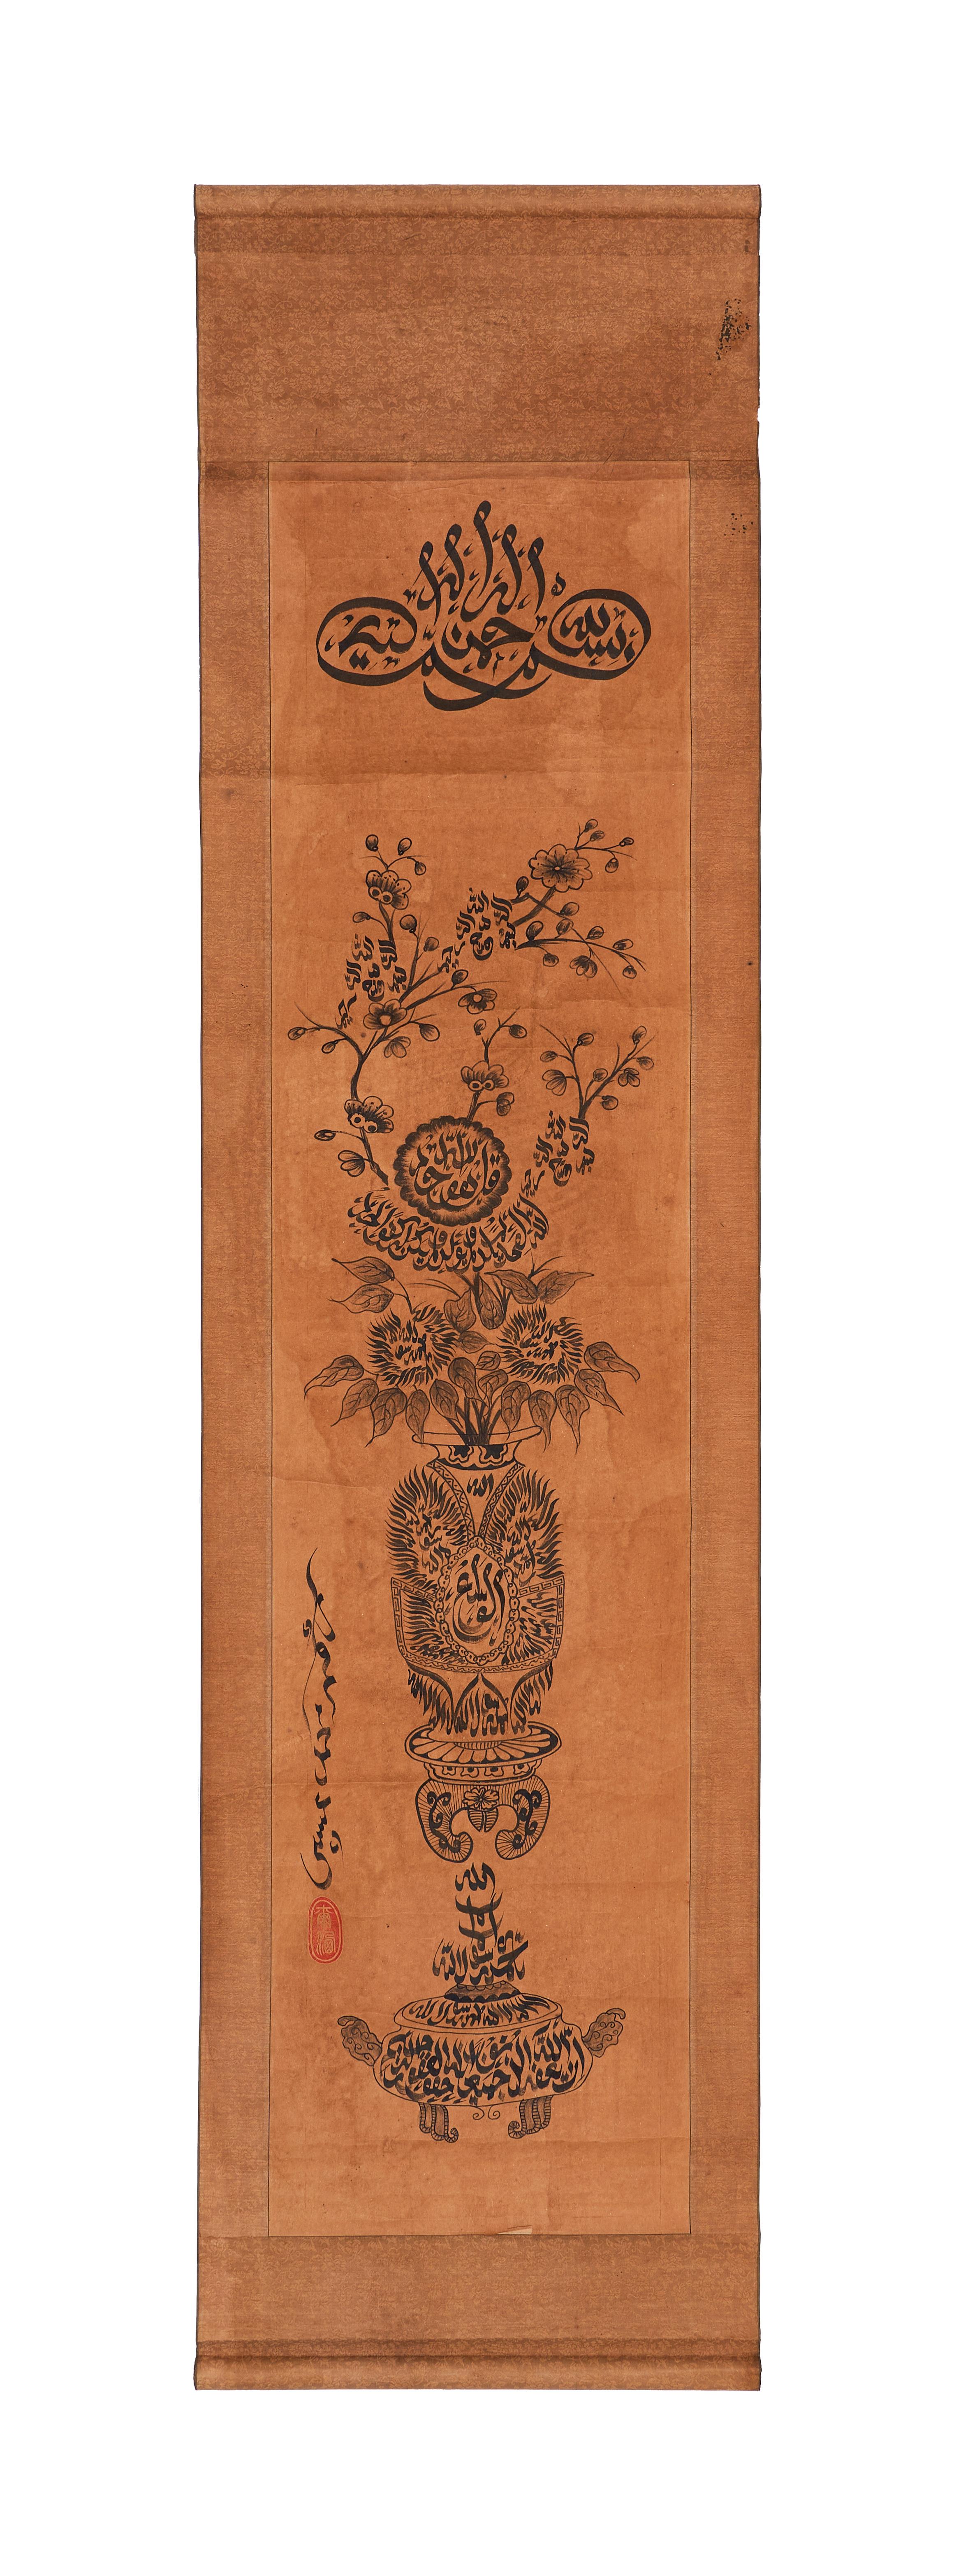 AN ISLAMIC INSCRIBED CHINESE SCROLL, QING DYNASTY (1644-1911)